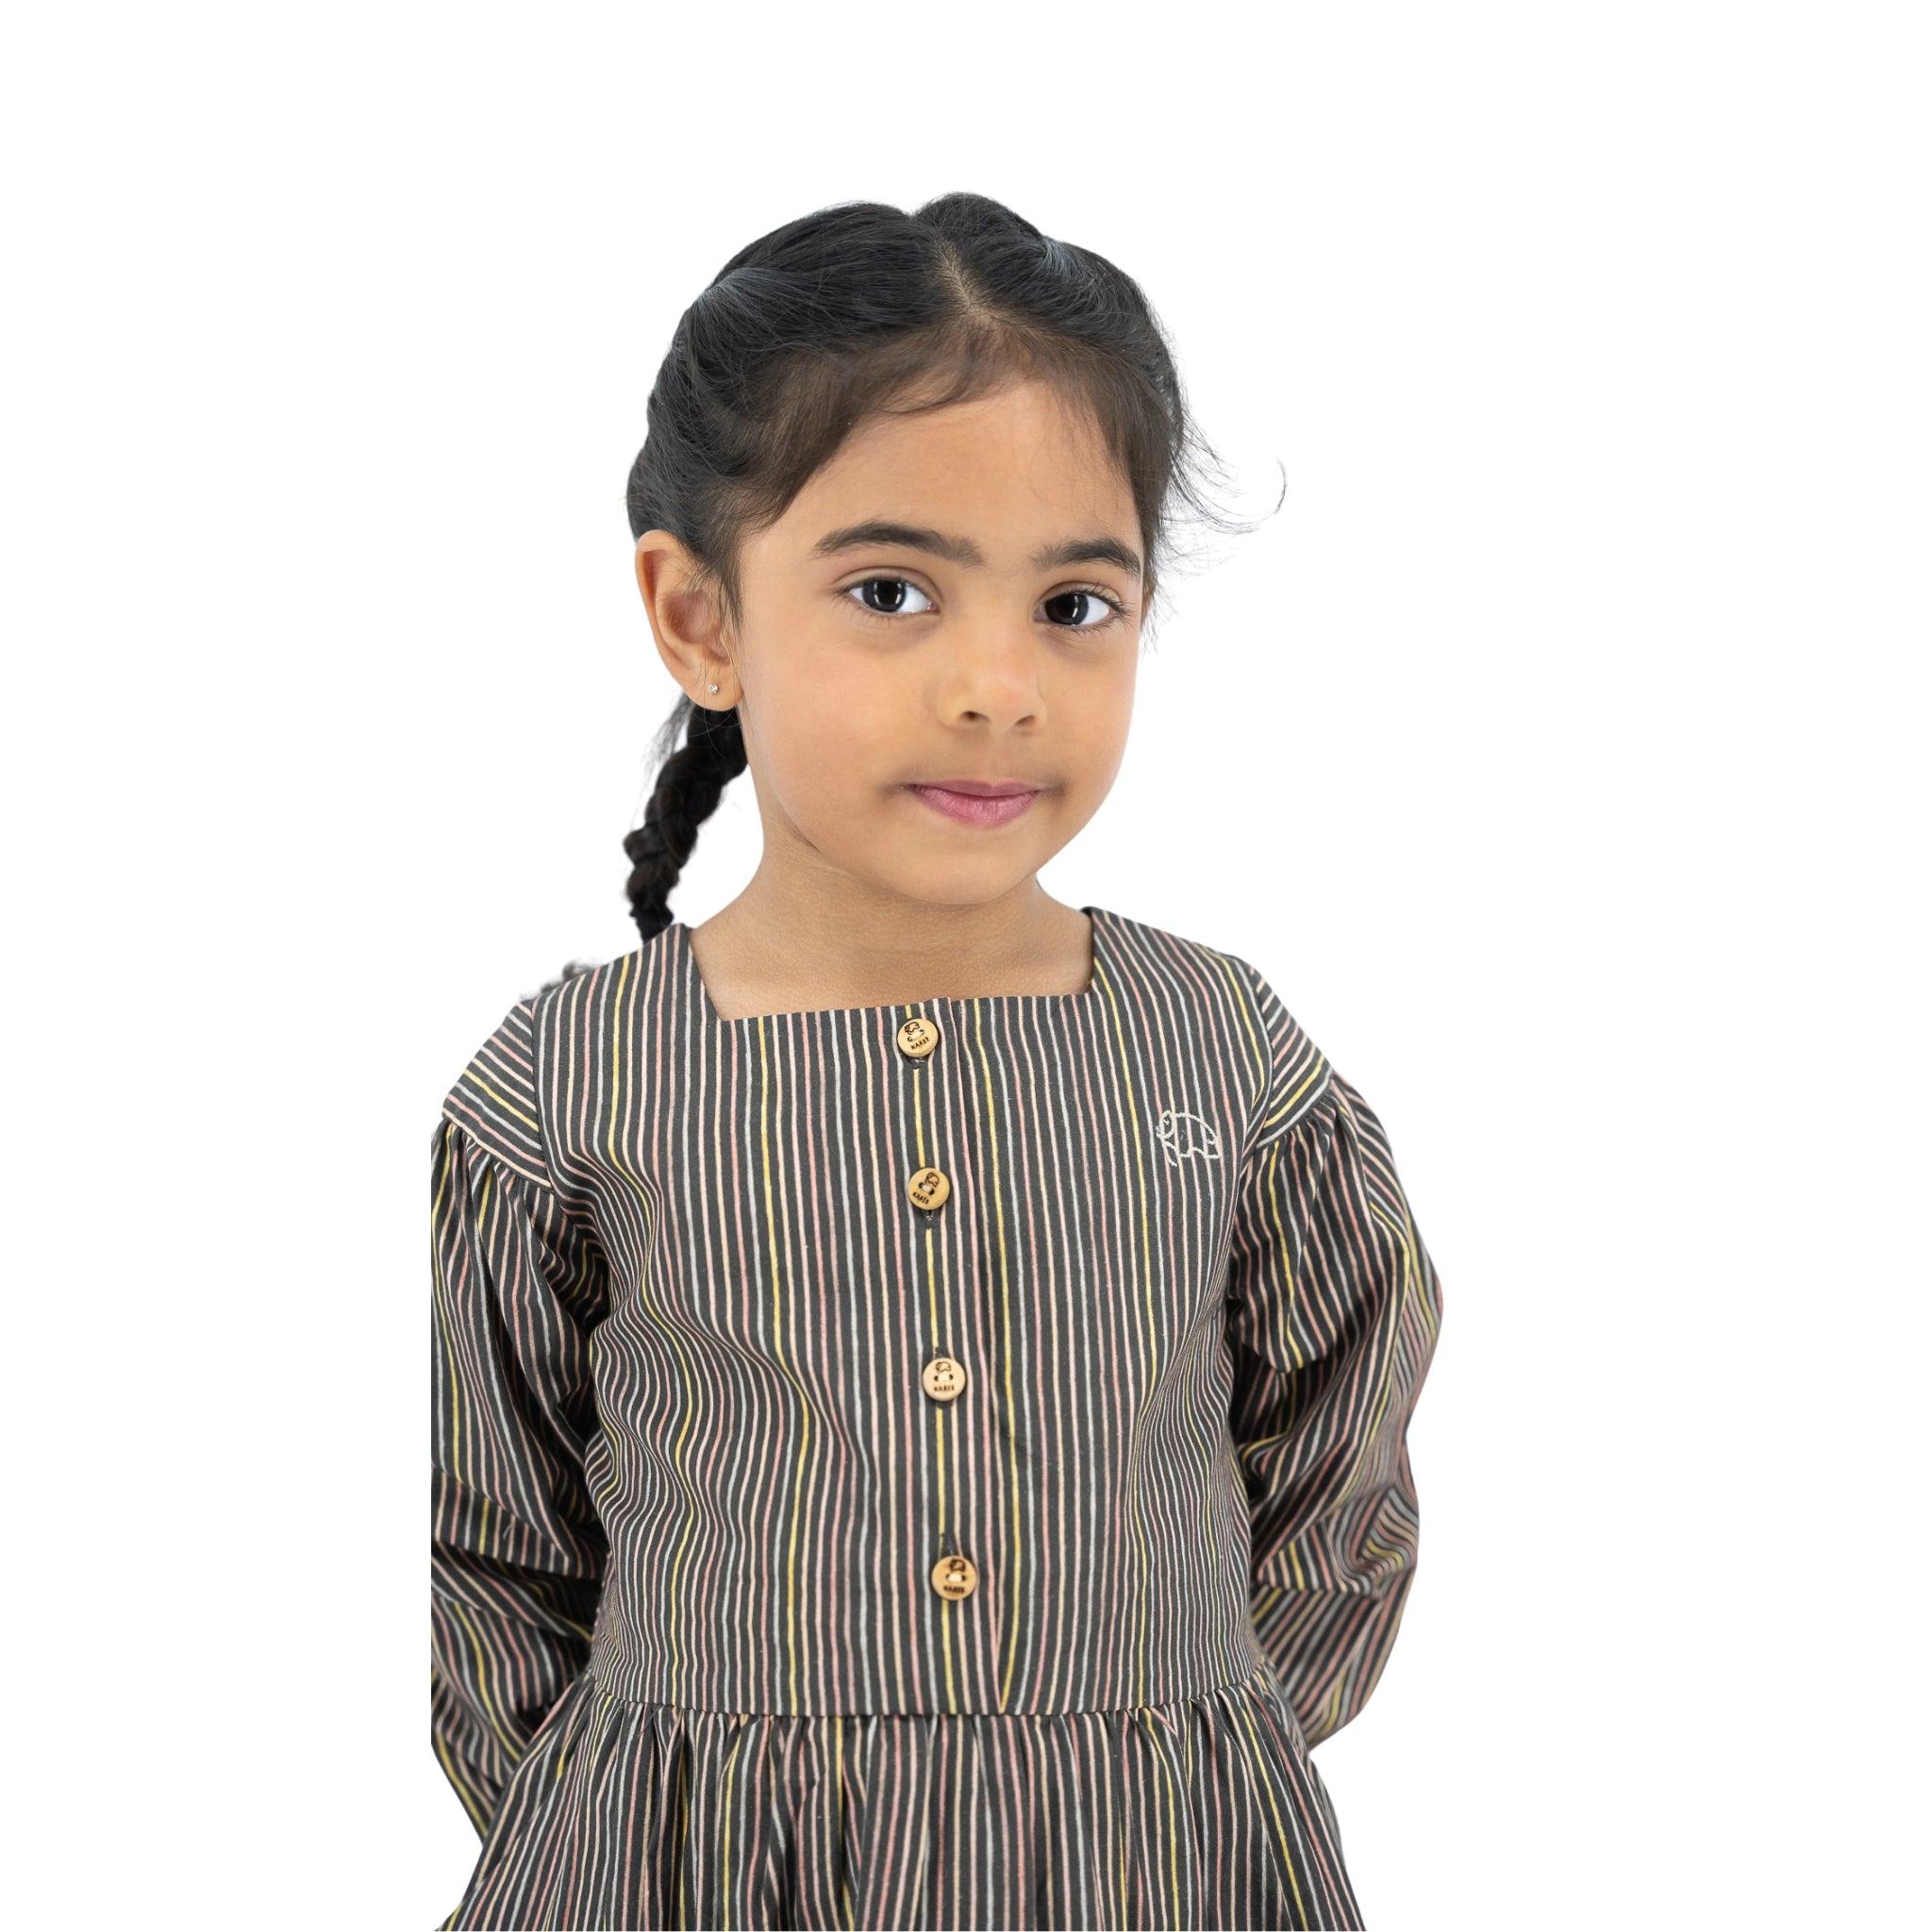 Young girl with dark hair in braids wearing a Karee black striped full sleeve cotton dress, standing against a white background.